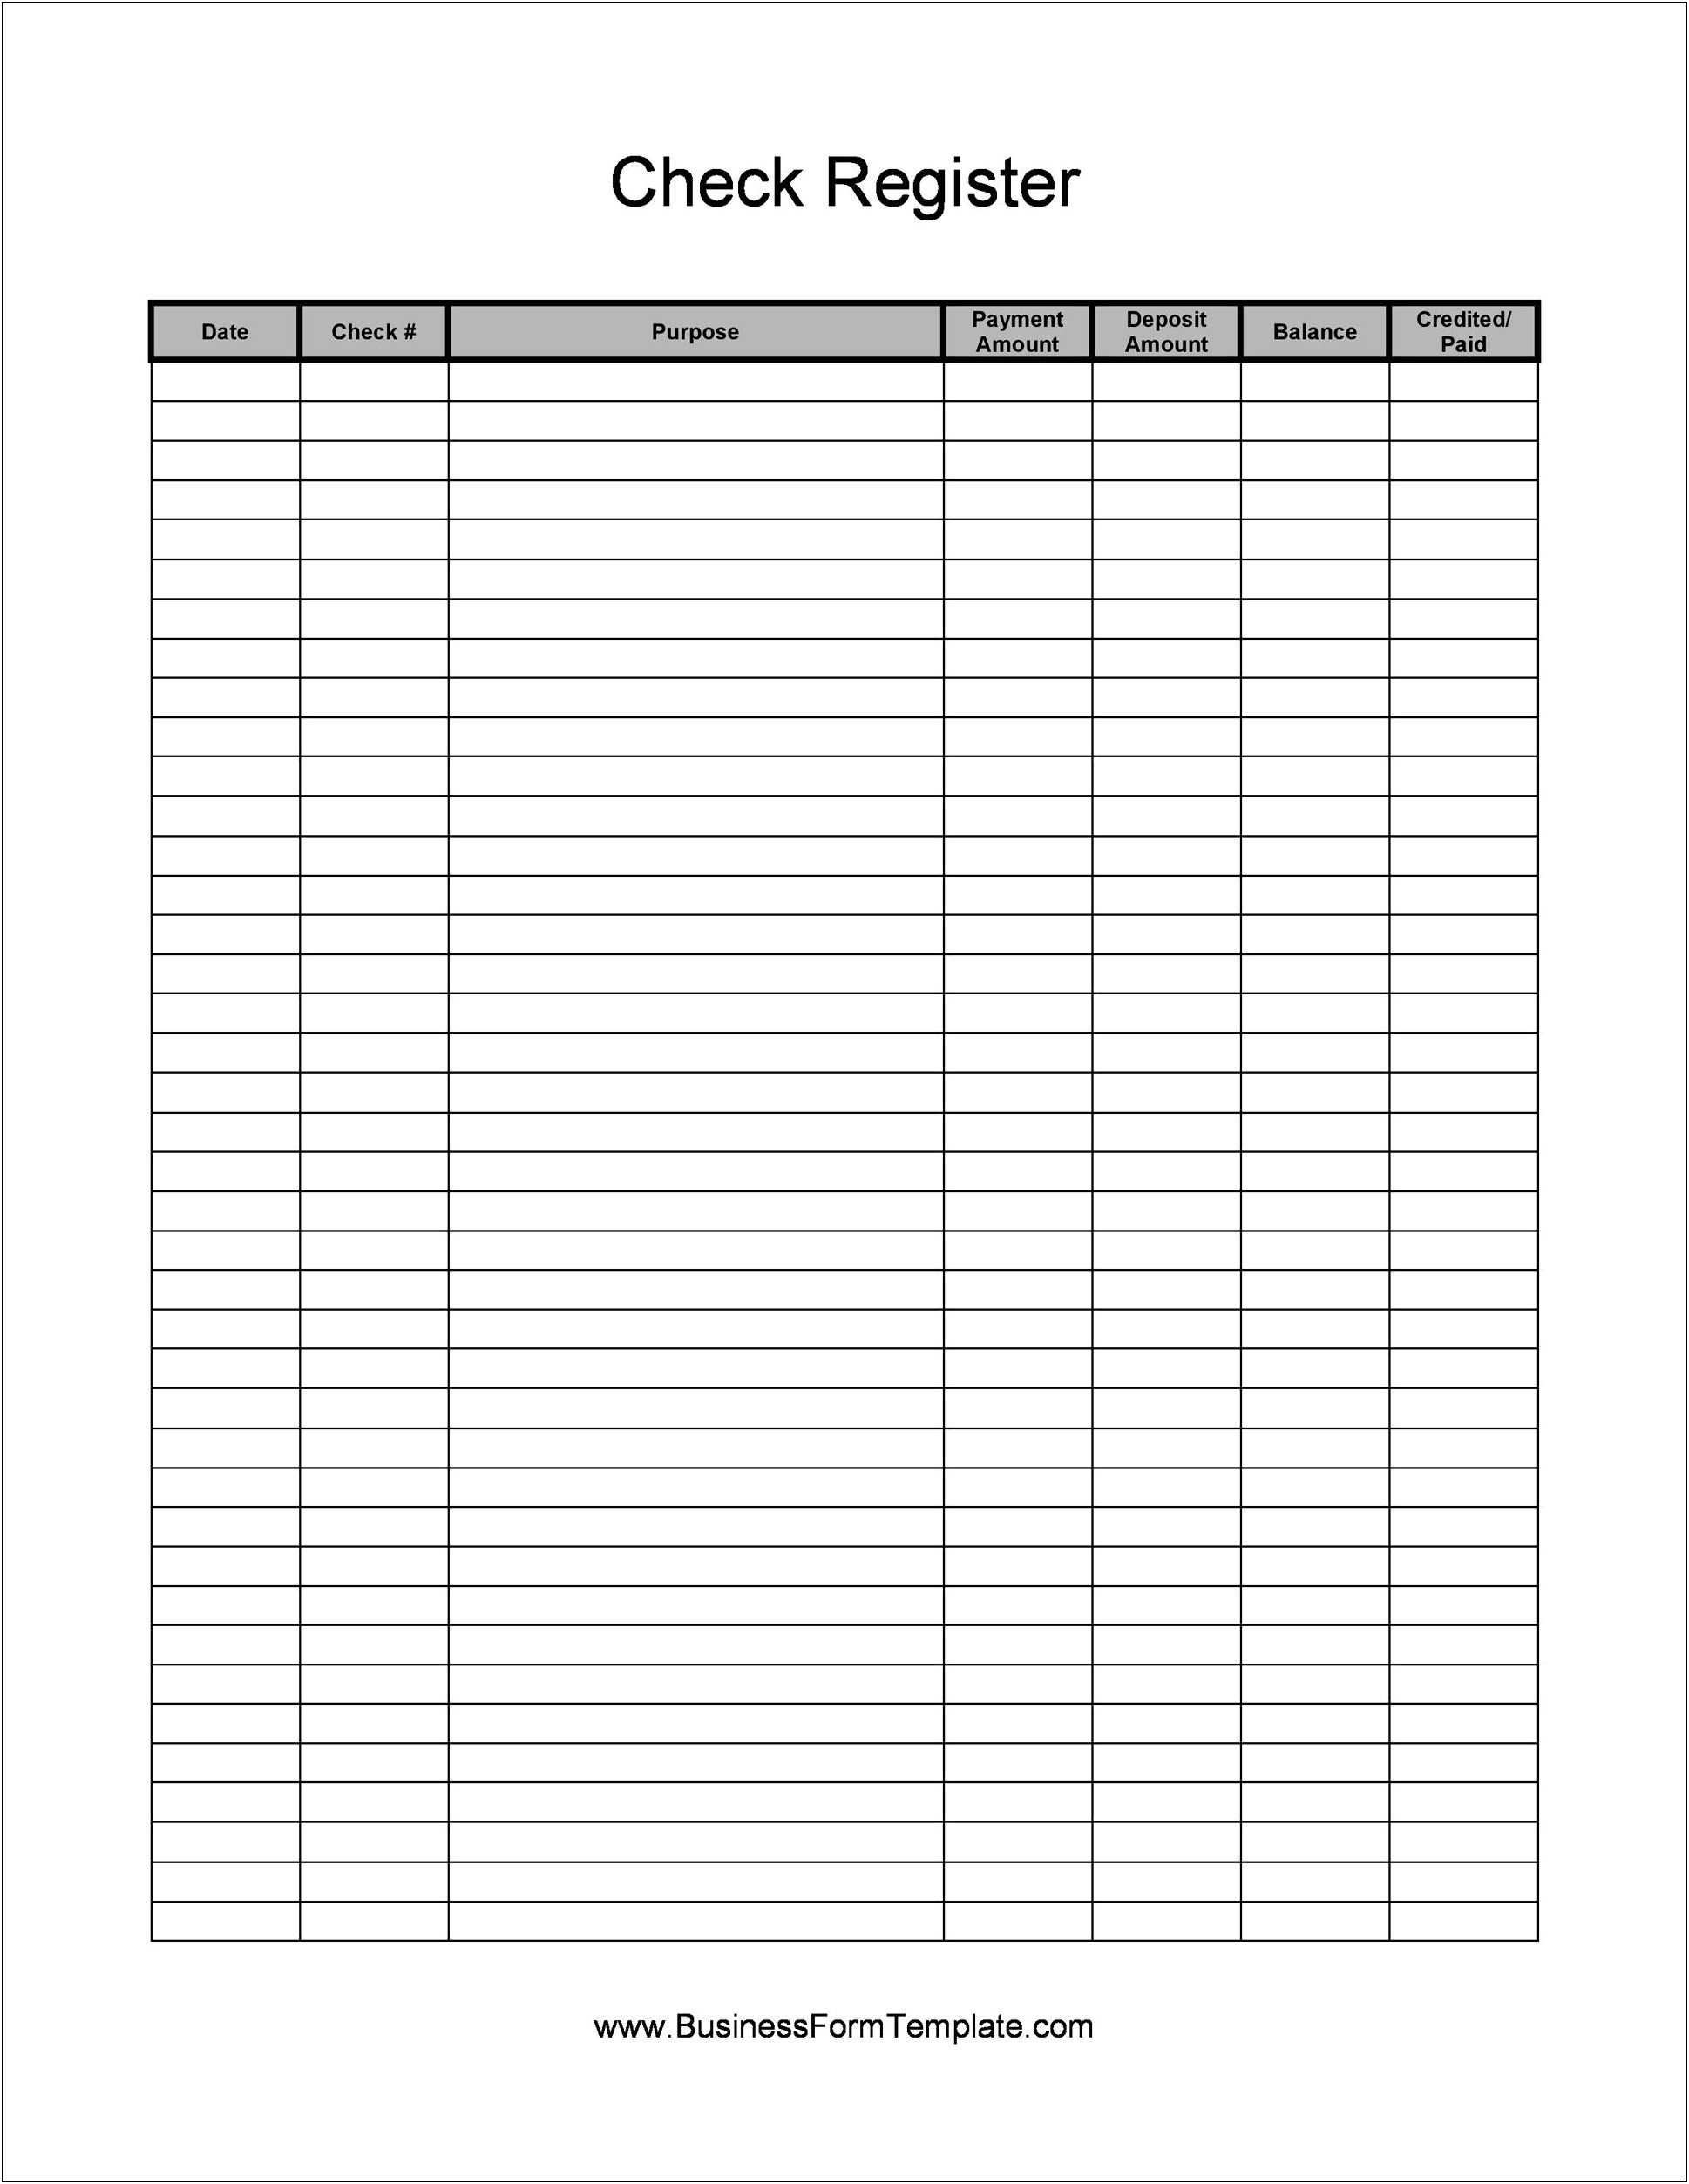 Free Corporate Check Register Excel Template